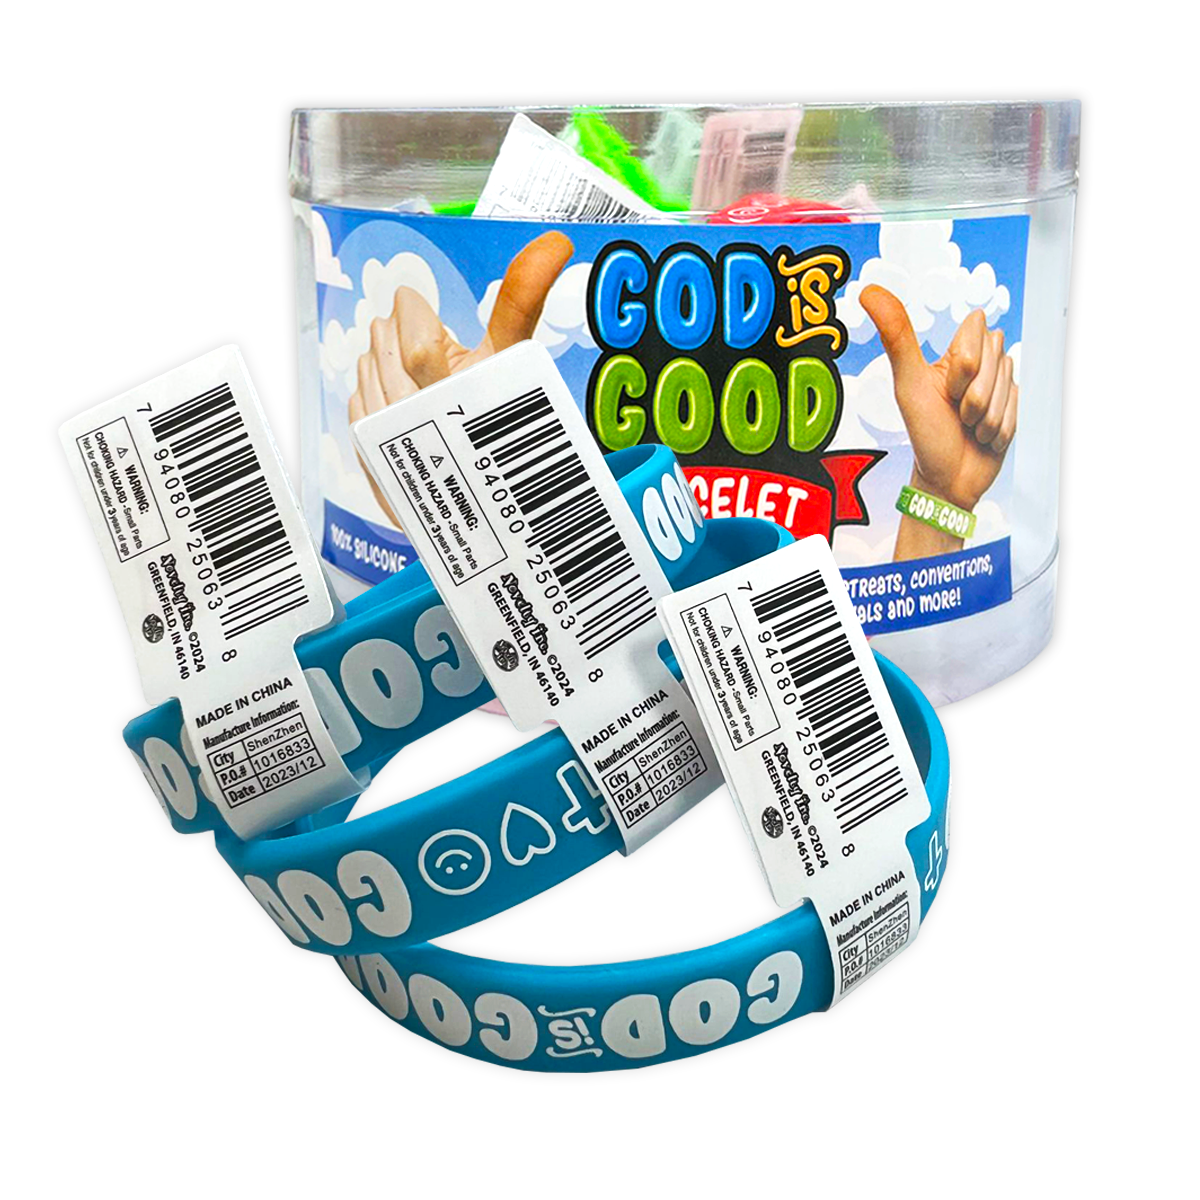 WHOLESALE GOD IS GOOD SILICONE WRISTBAND 12 PIECES PER DISPLAY 25063